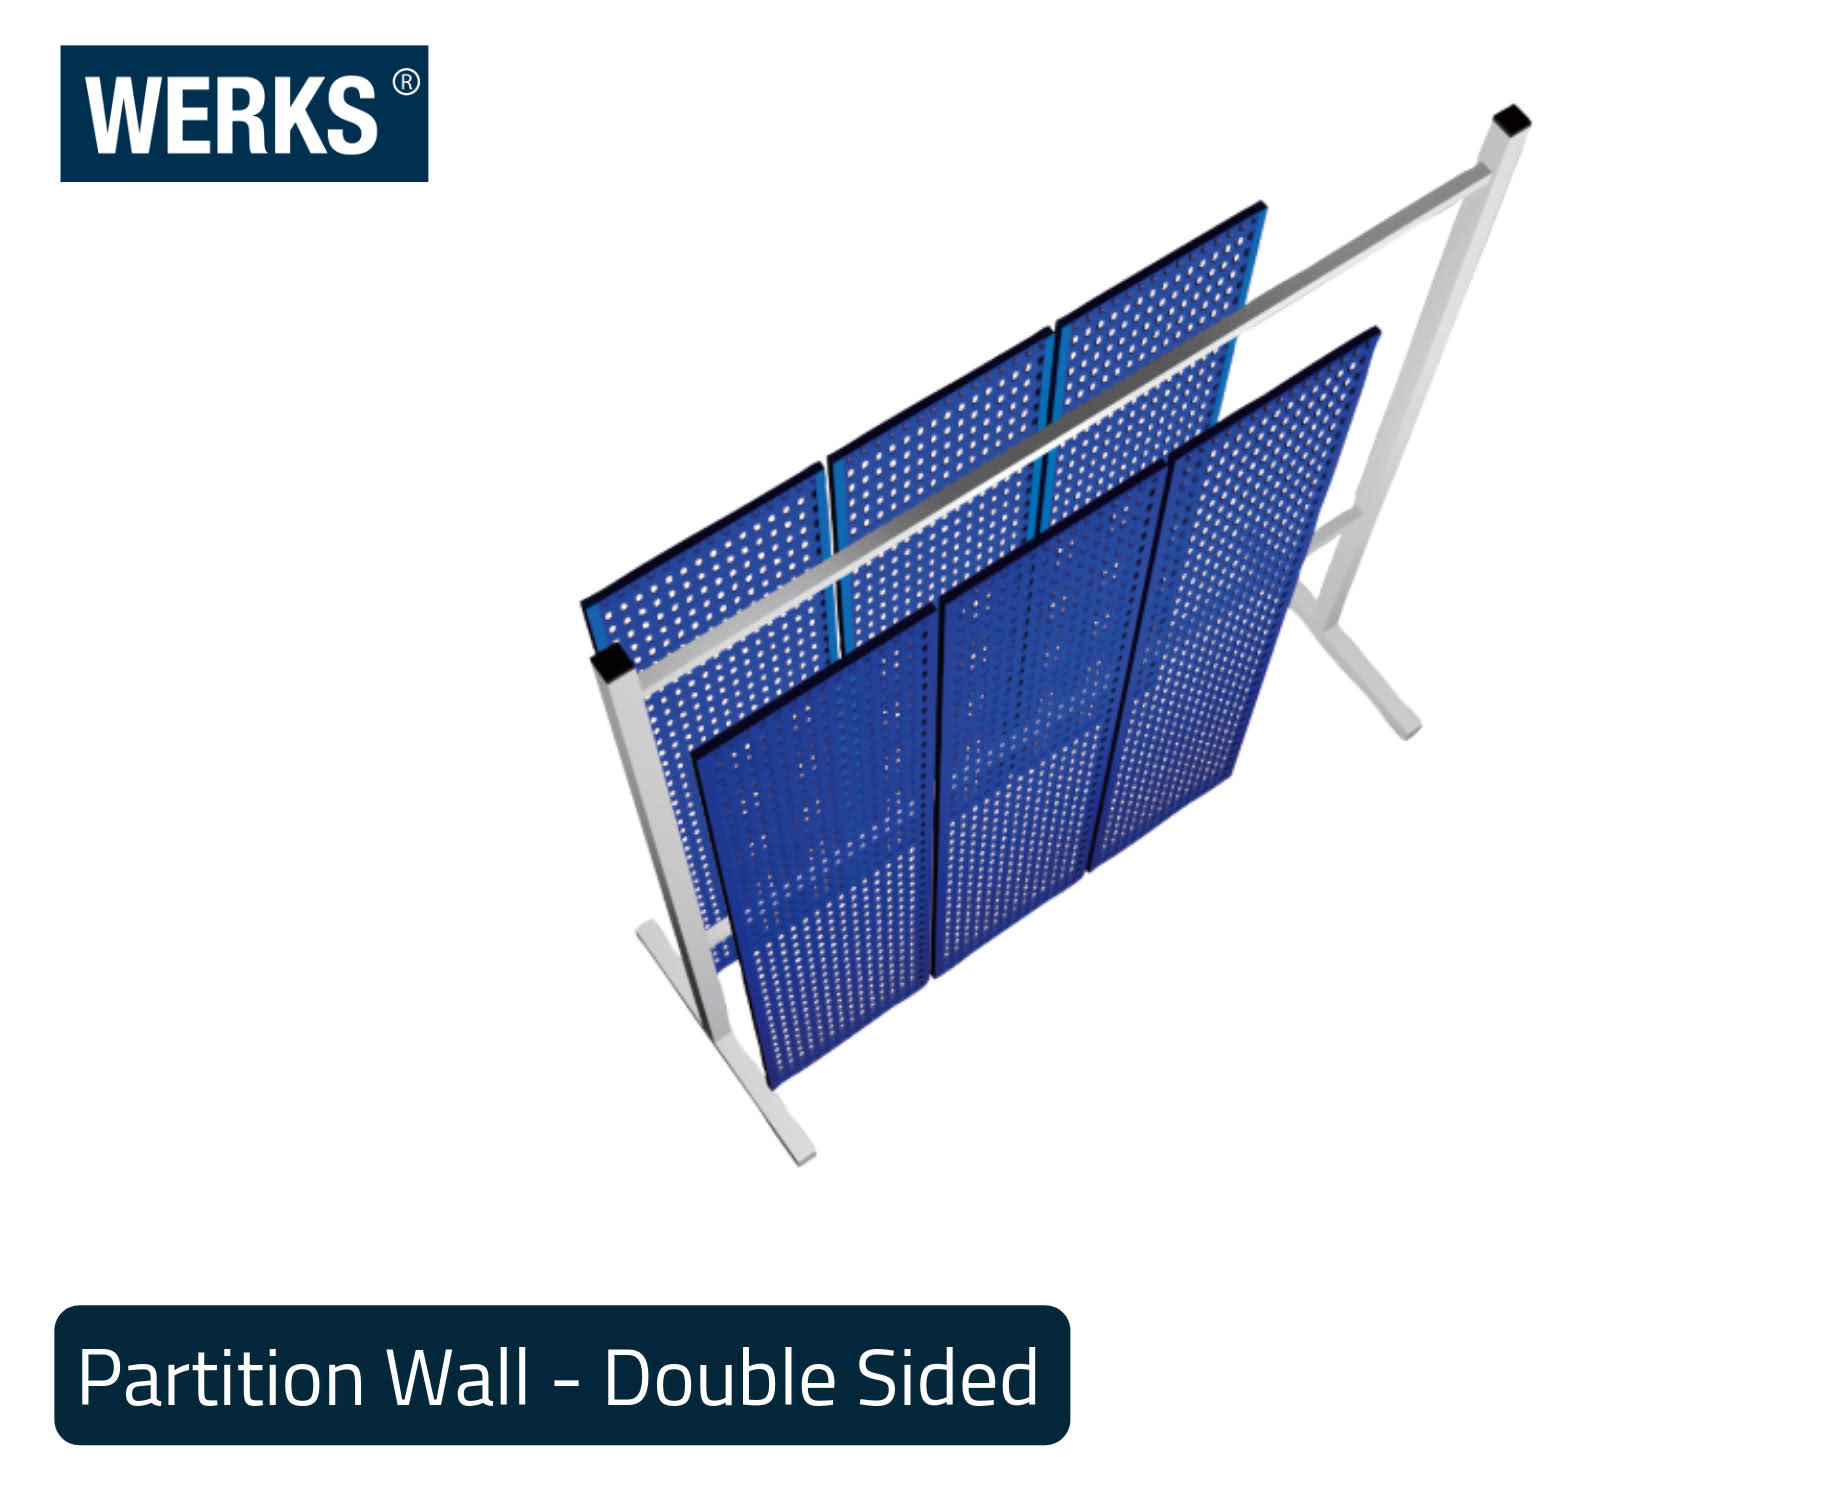 WERKS® Partition Walls - Perforated Panels